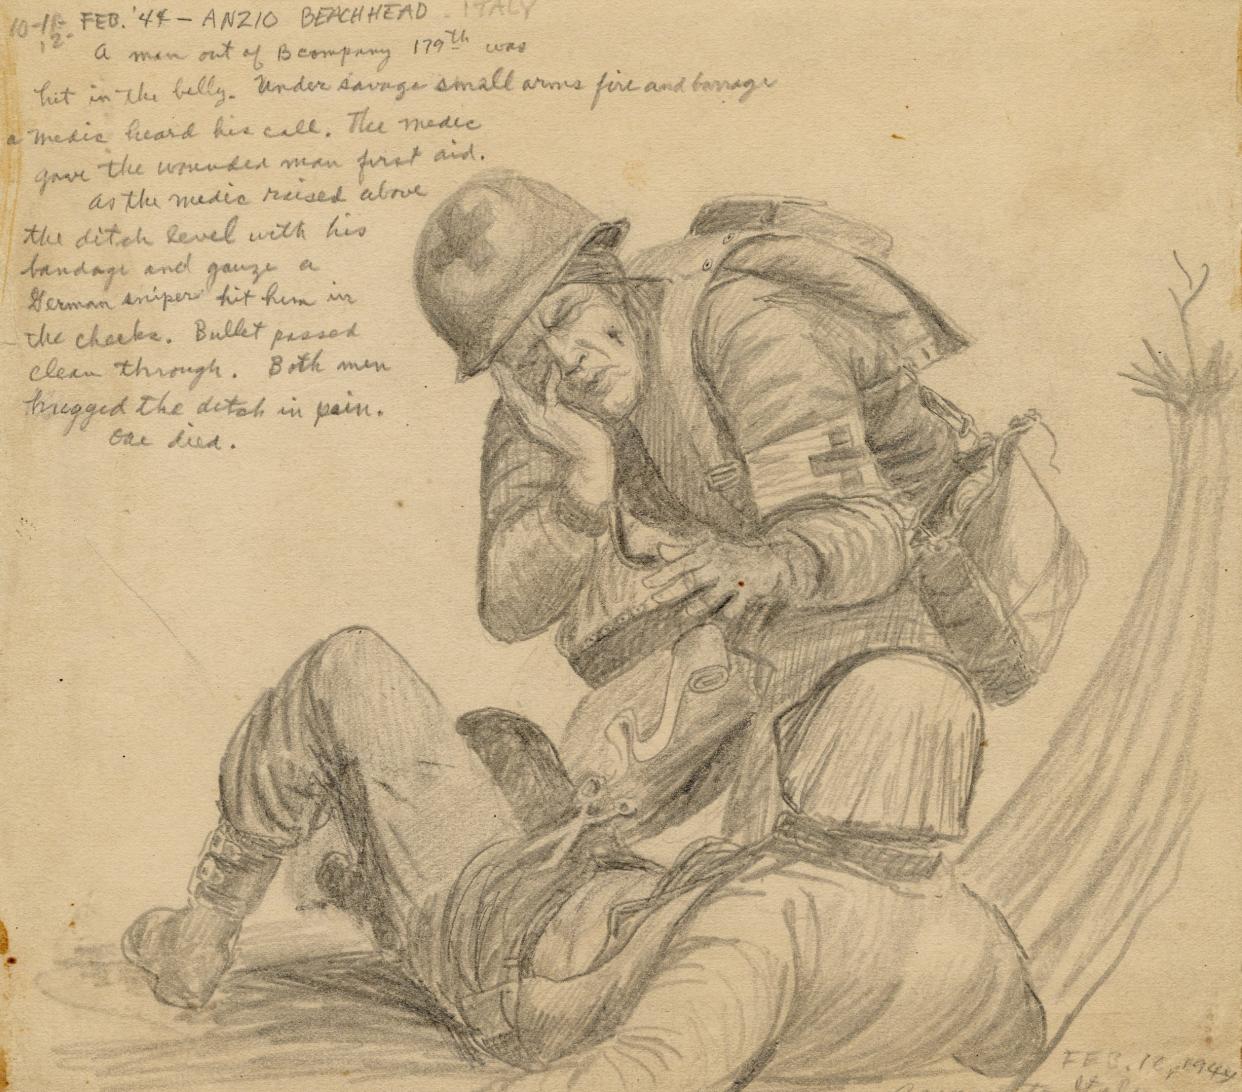 At the National Cowboy & Western Heritage Museum in OKC, the exhibit "Nations at War! Field Sketches of a Pawnee Warrior" showcases drawings created by Pawnee soldier Brummett Echohawk during his service with the 45th Infantry Division in World War II.